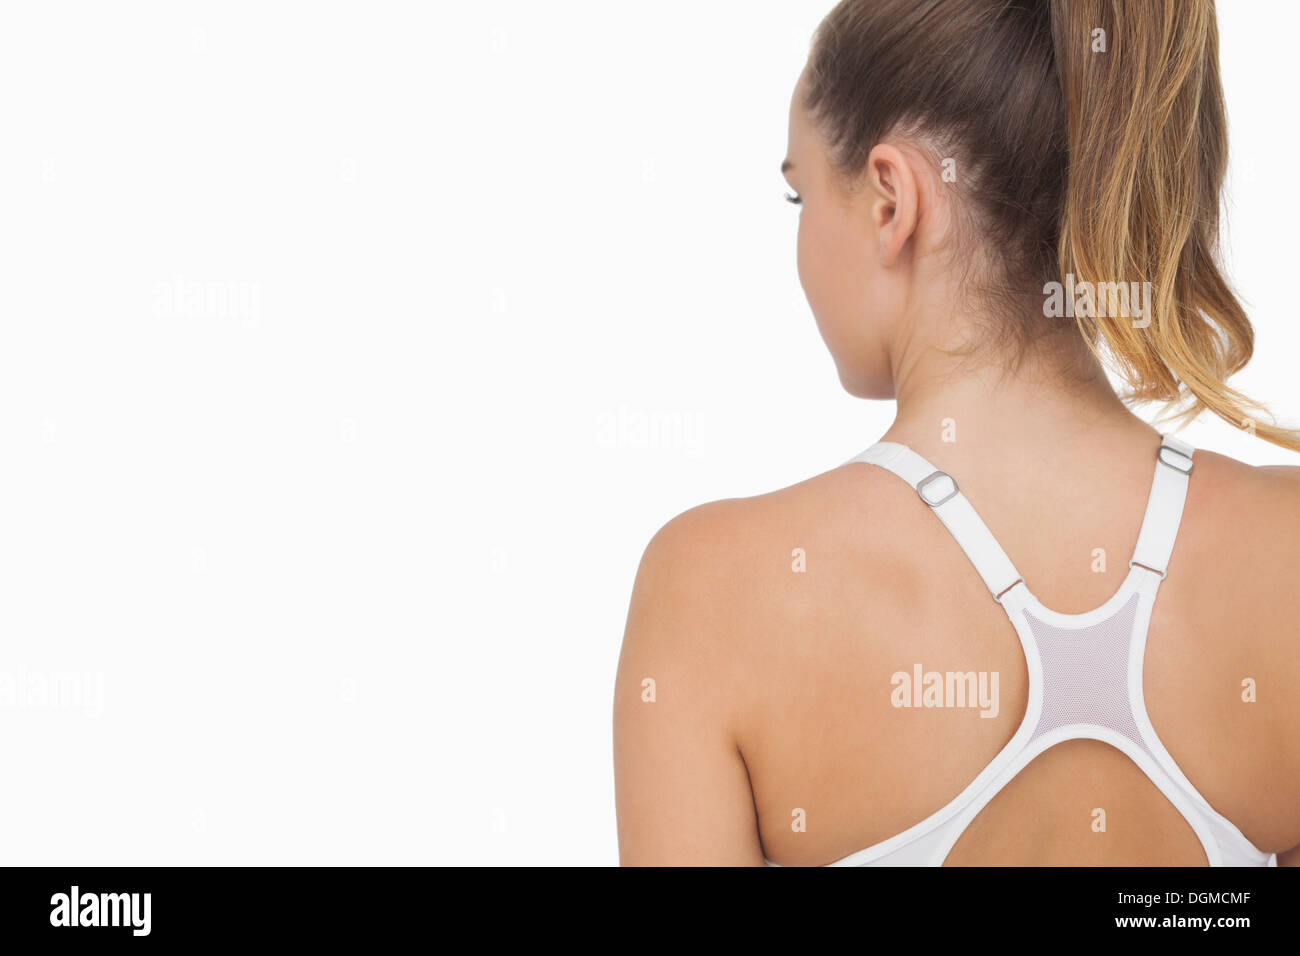 Rear view of ponytailed young woman wearing a sports bra Stock Photo